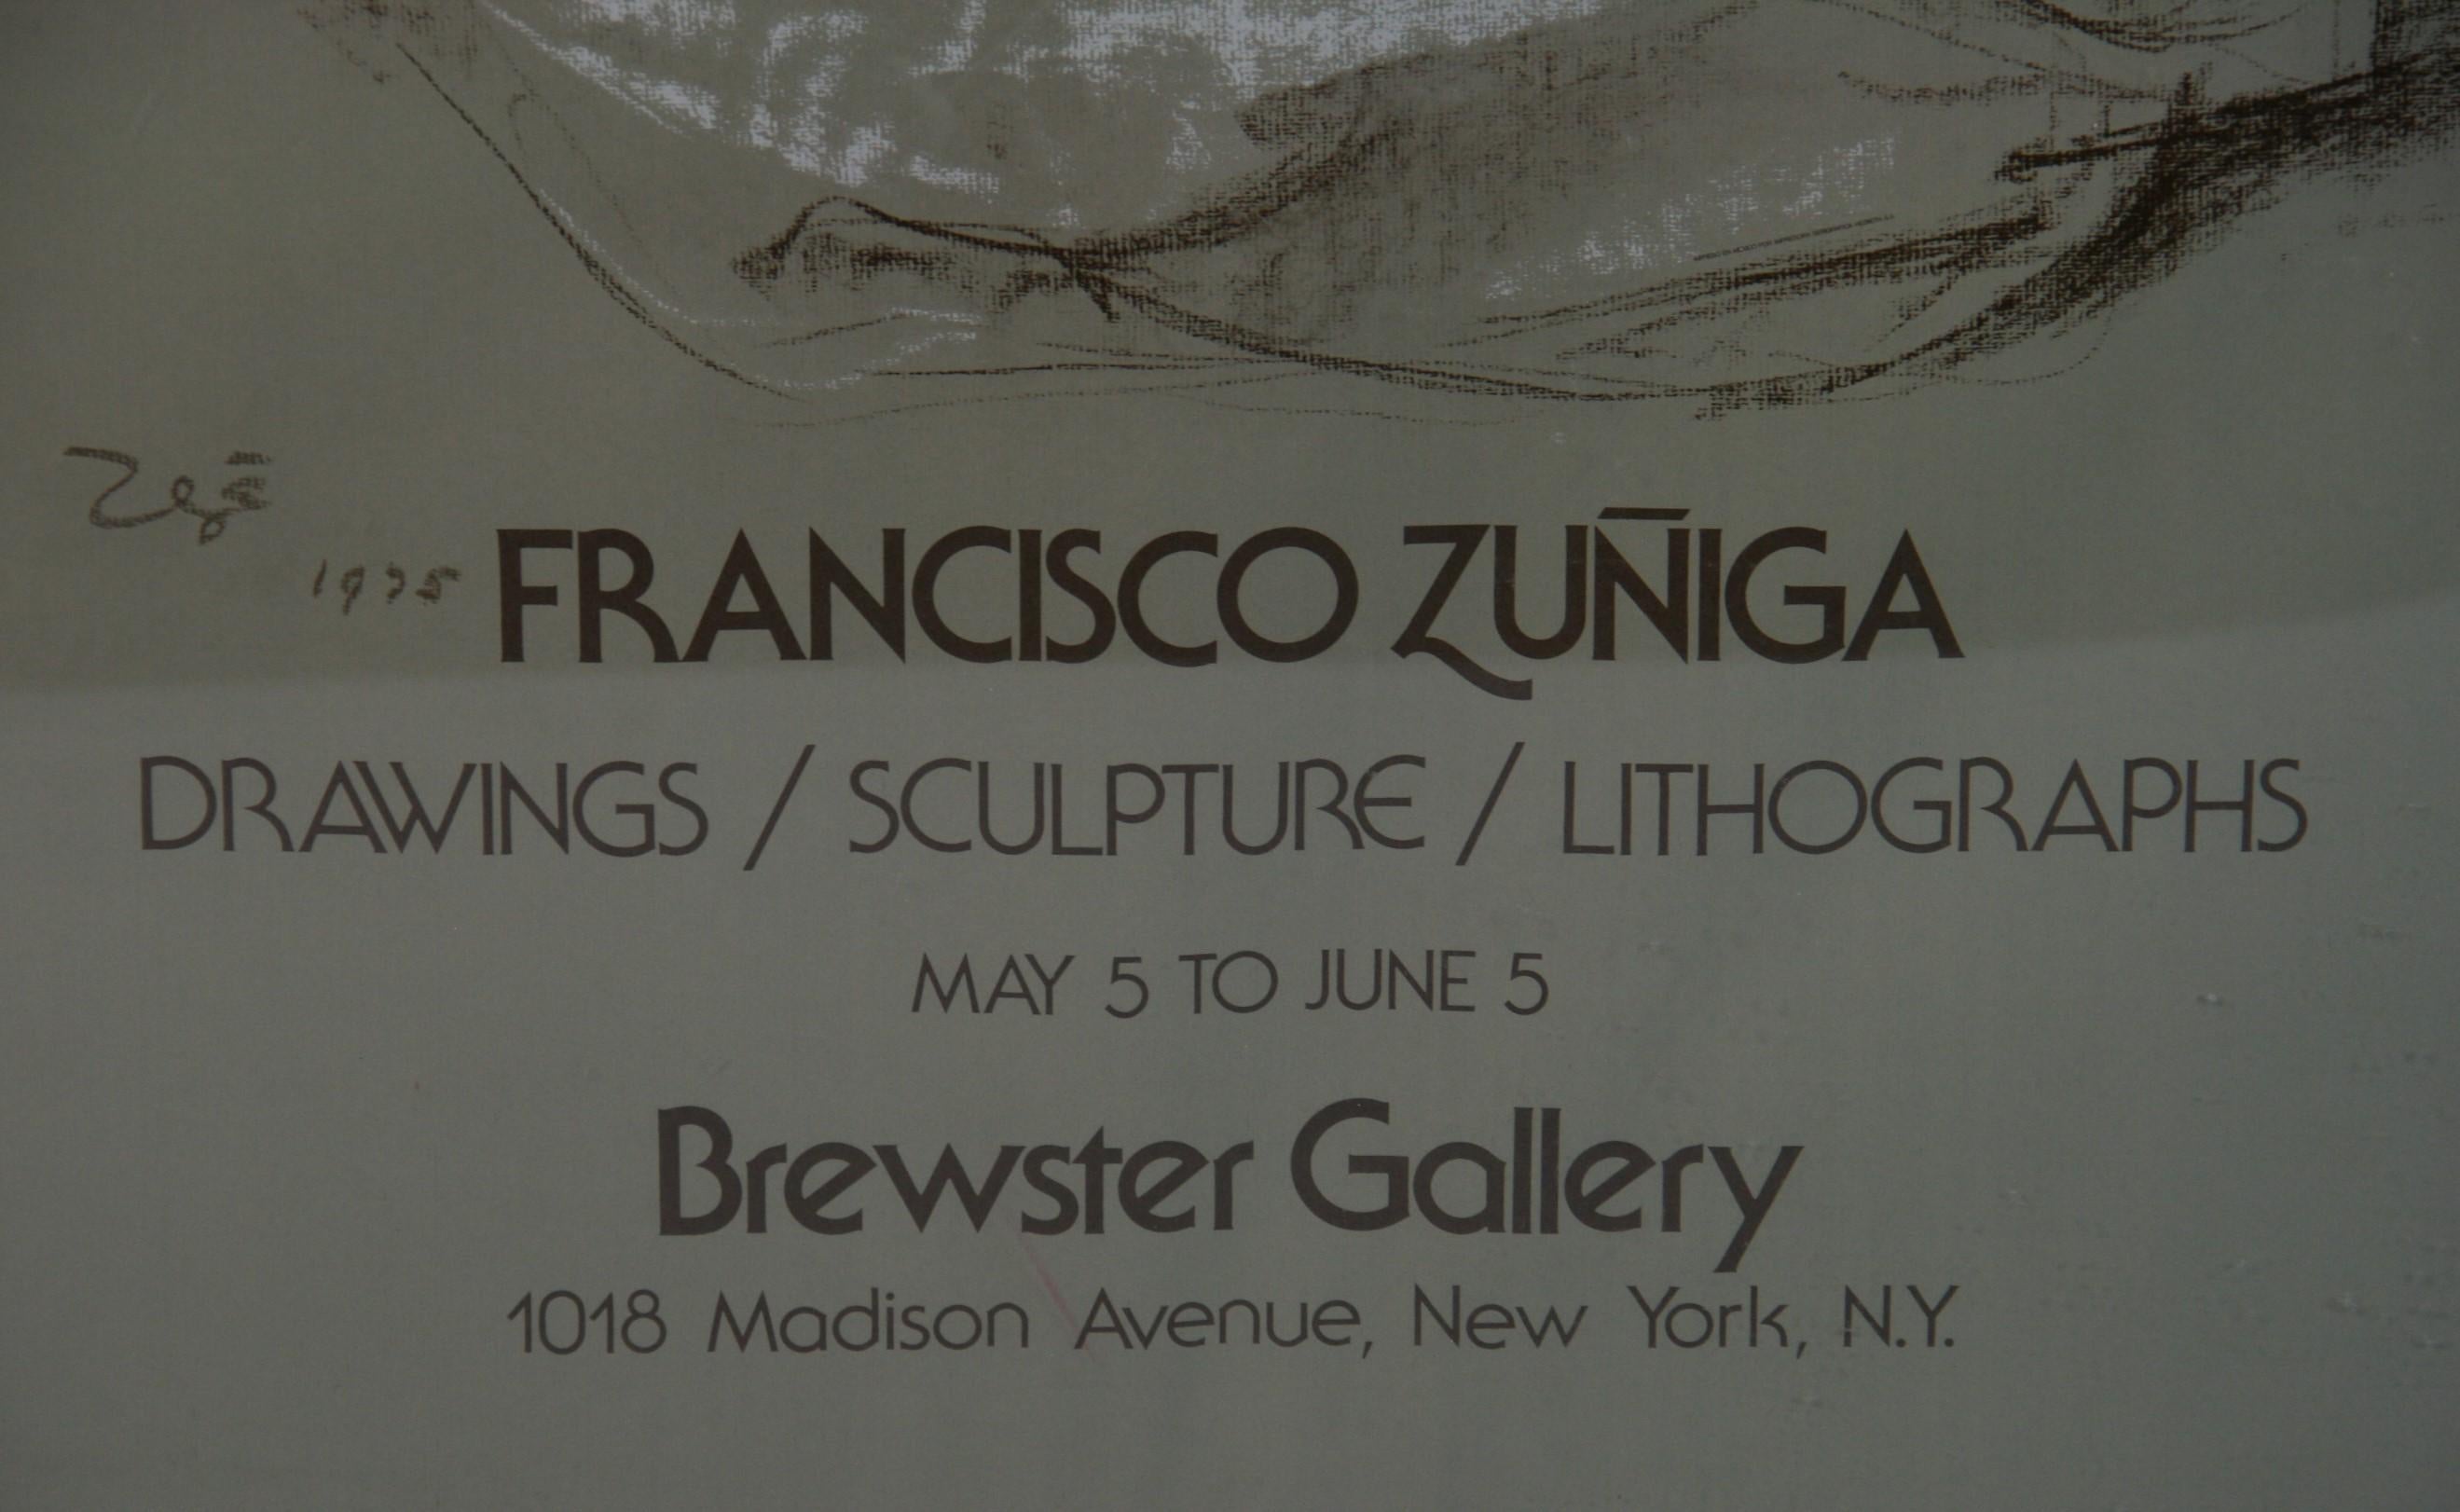 Gallery Opening  Poster Francisco Zuniga (Zgo) At Brewster Gallery 1975  For Sale 2